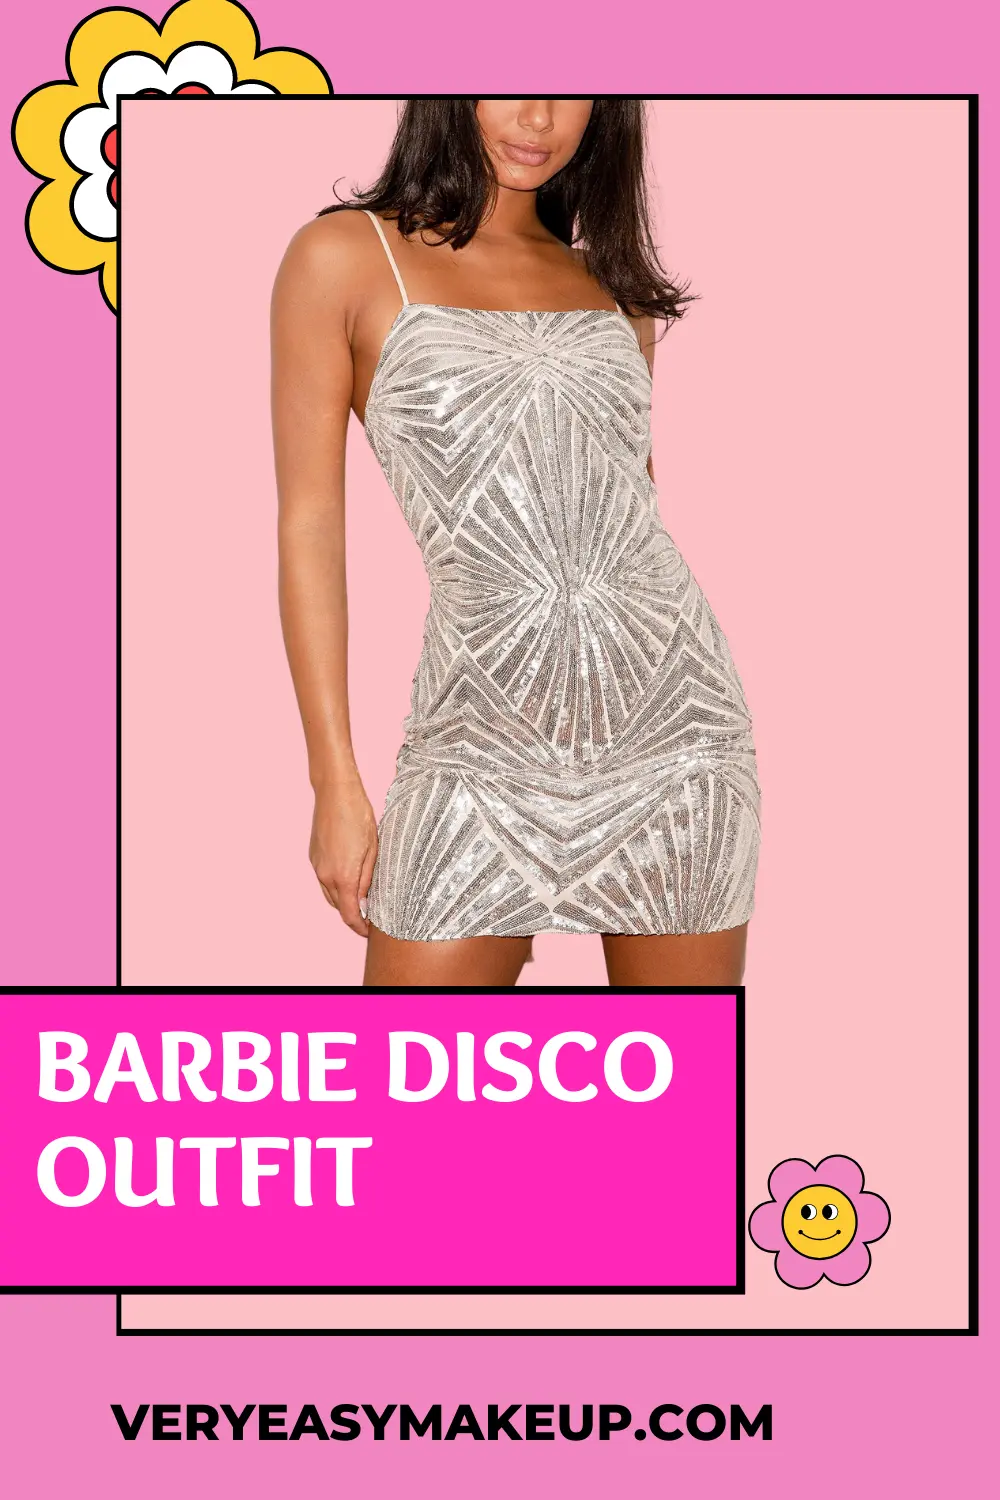 Barbie disco outfit